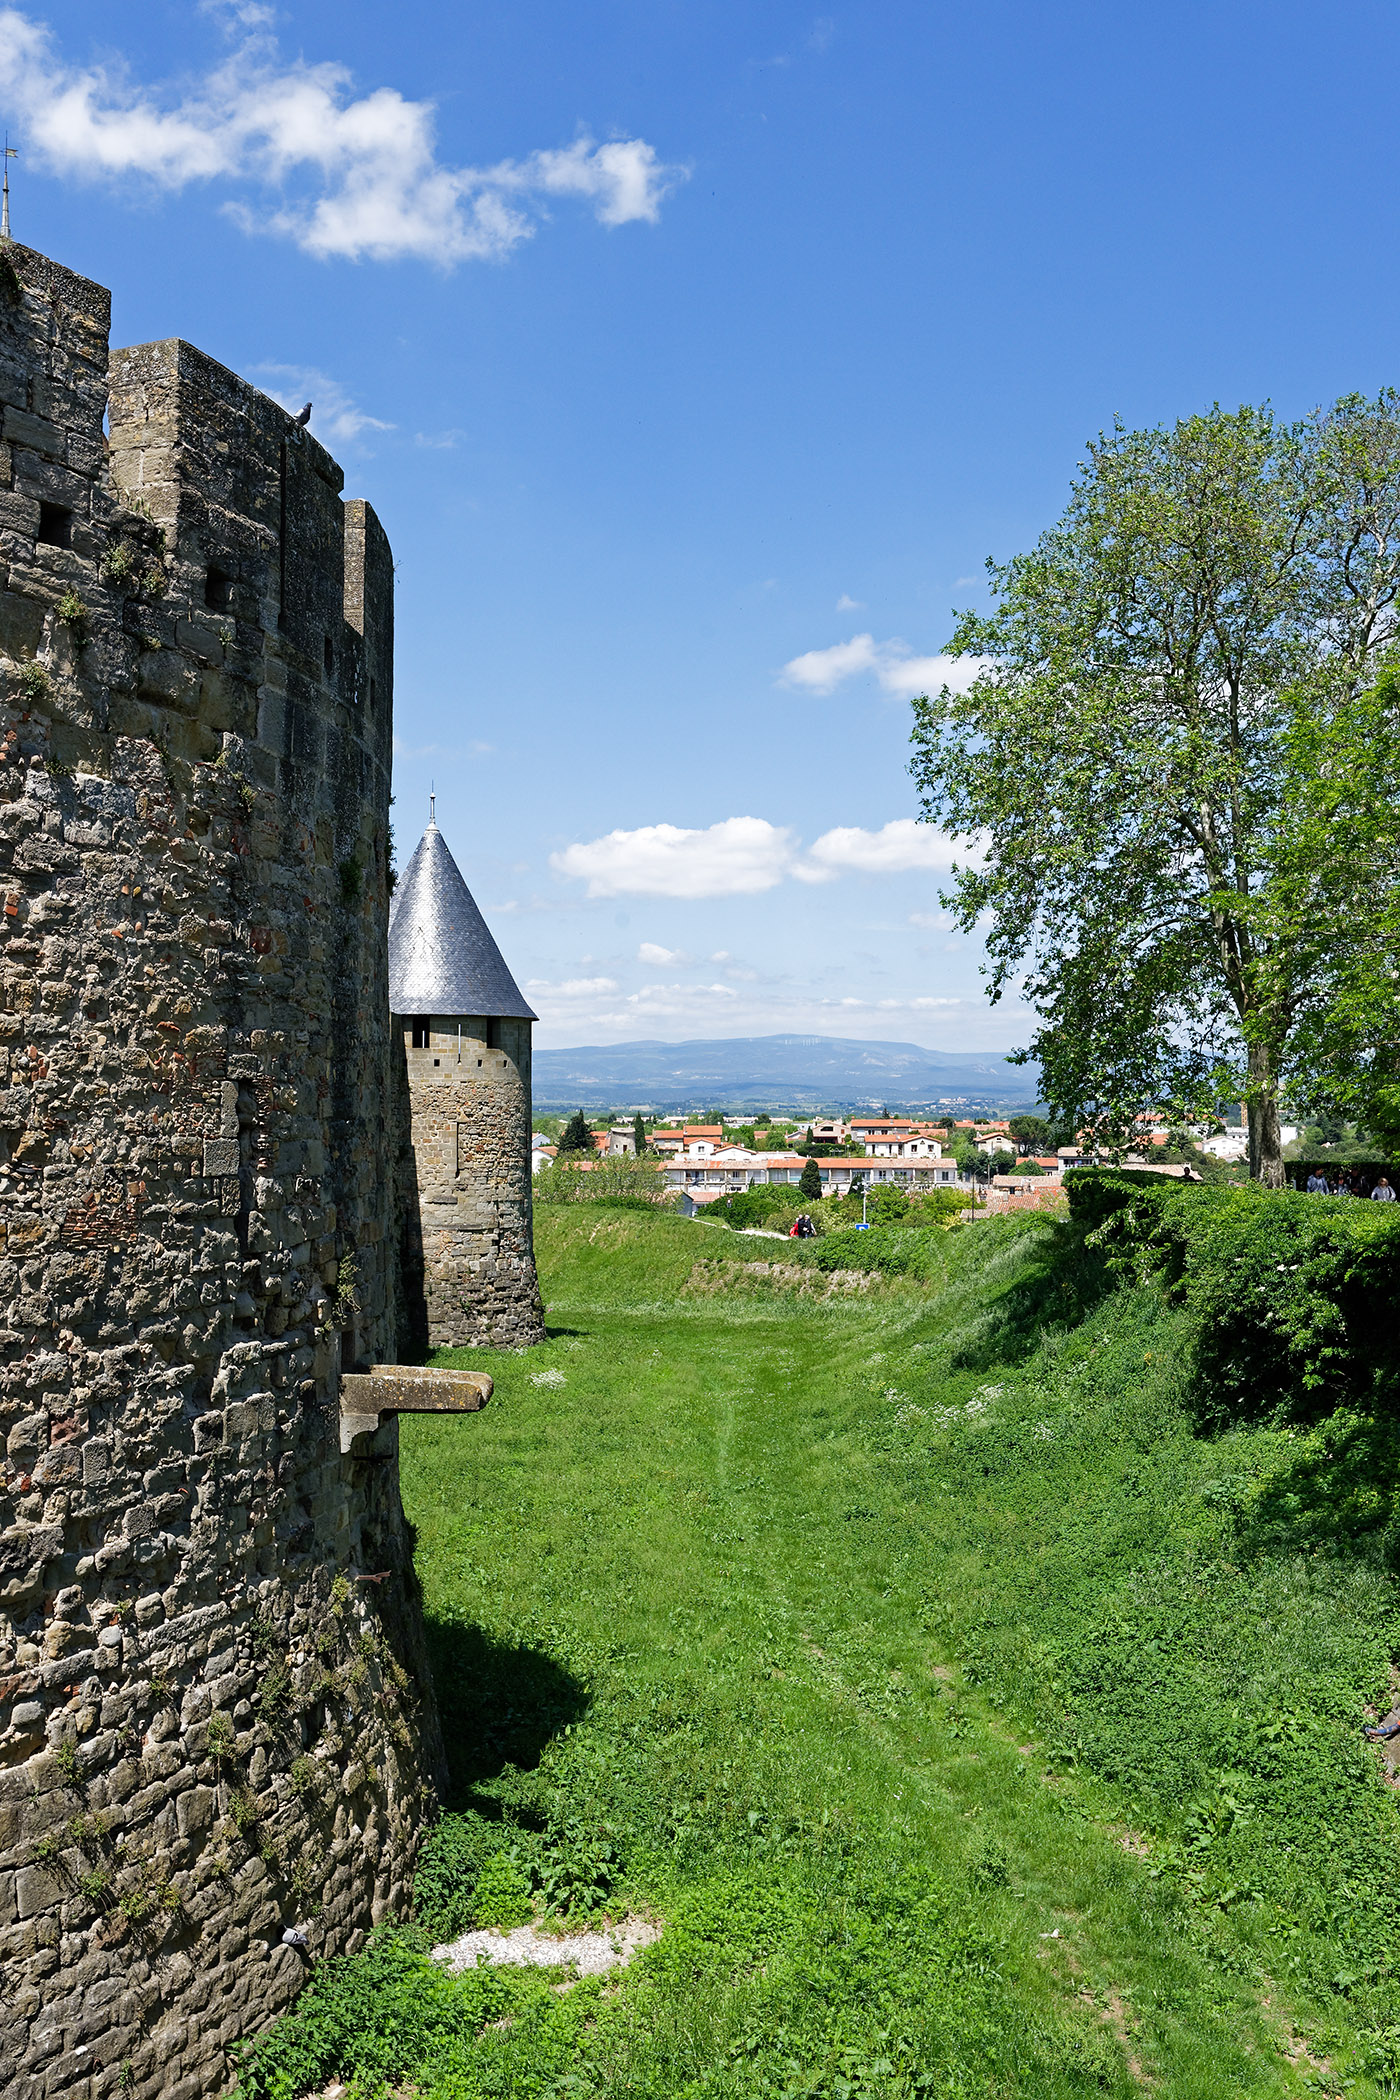 The view from the 'Porte Narbonnaise'